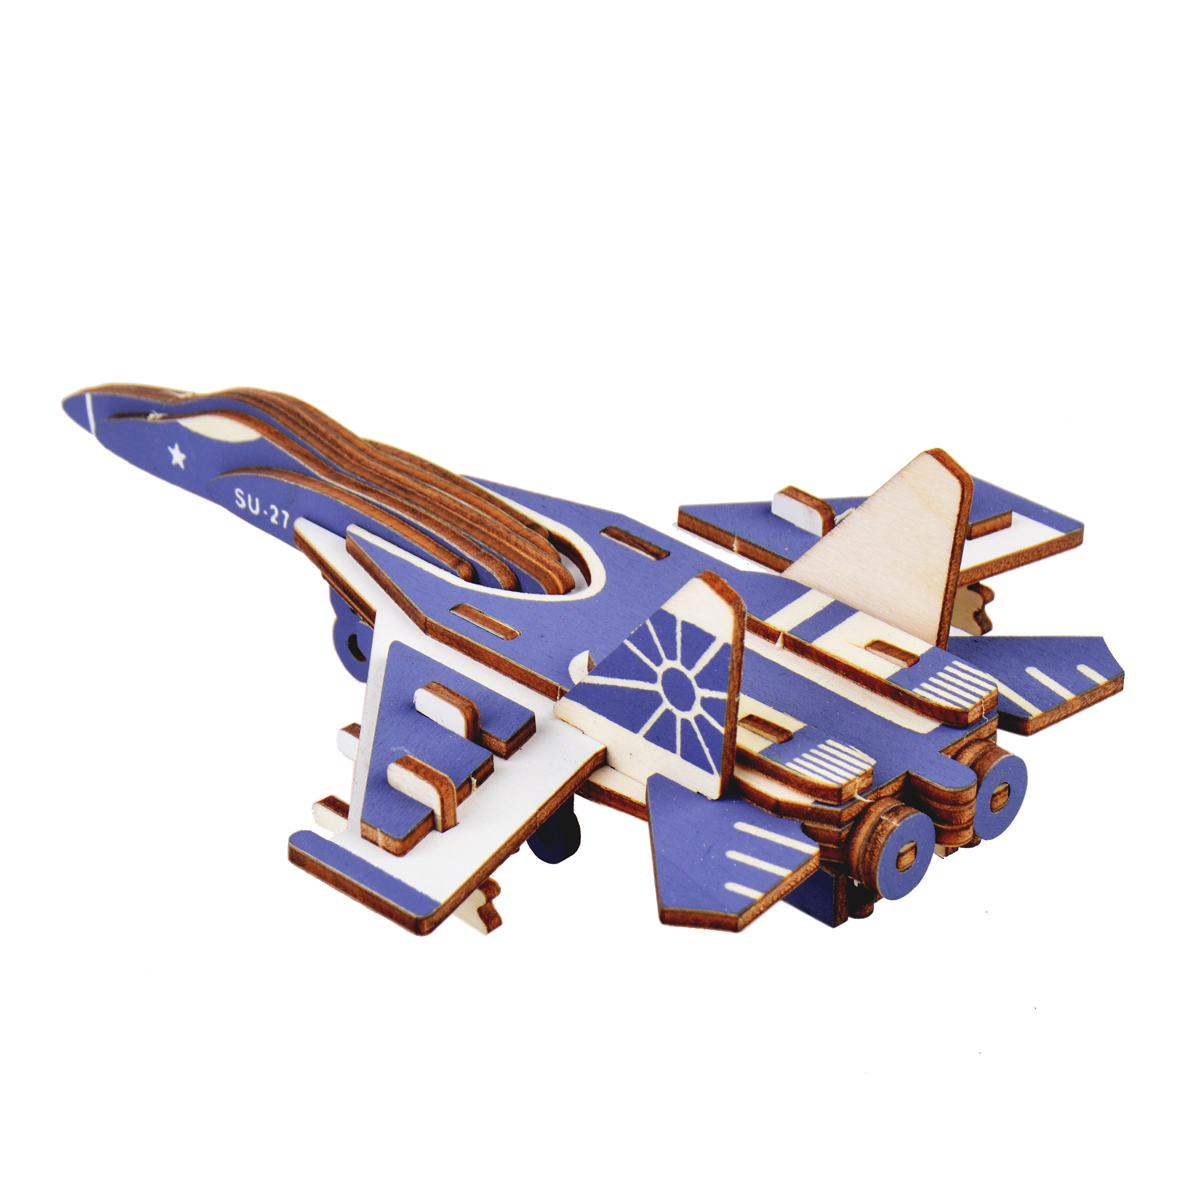 3D-Woodcraft-Assembly-Western-Fighter-Series-Kit-Jigsaw-Puzzle-Decoration-Toy-Model-for-Kids-Gift-1632732-7